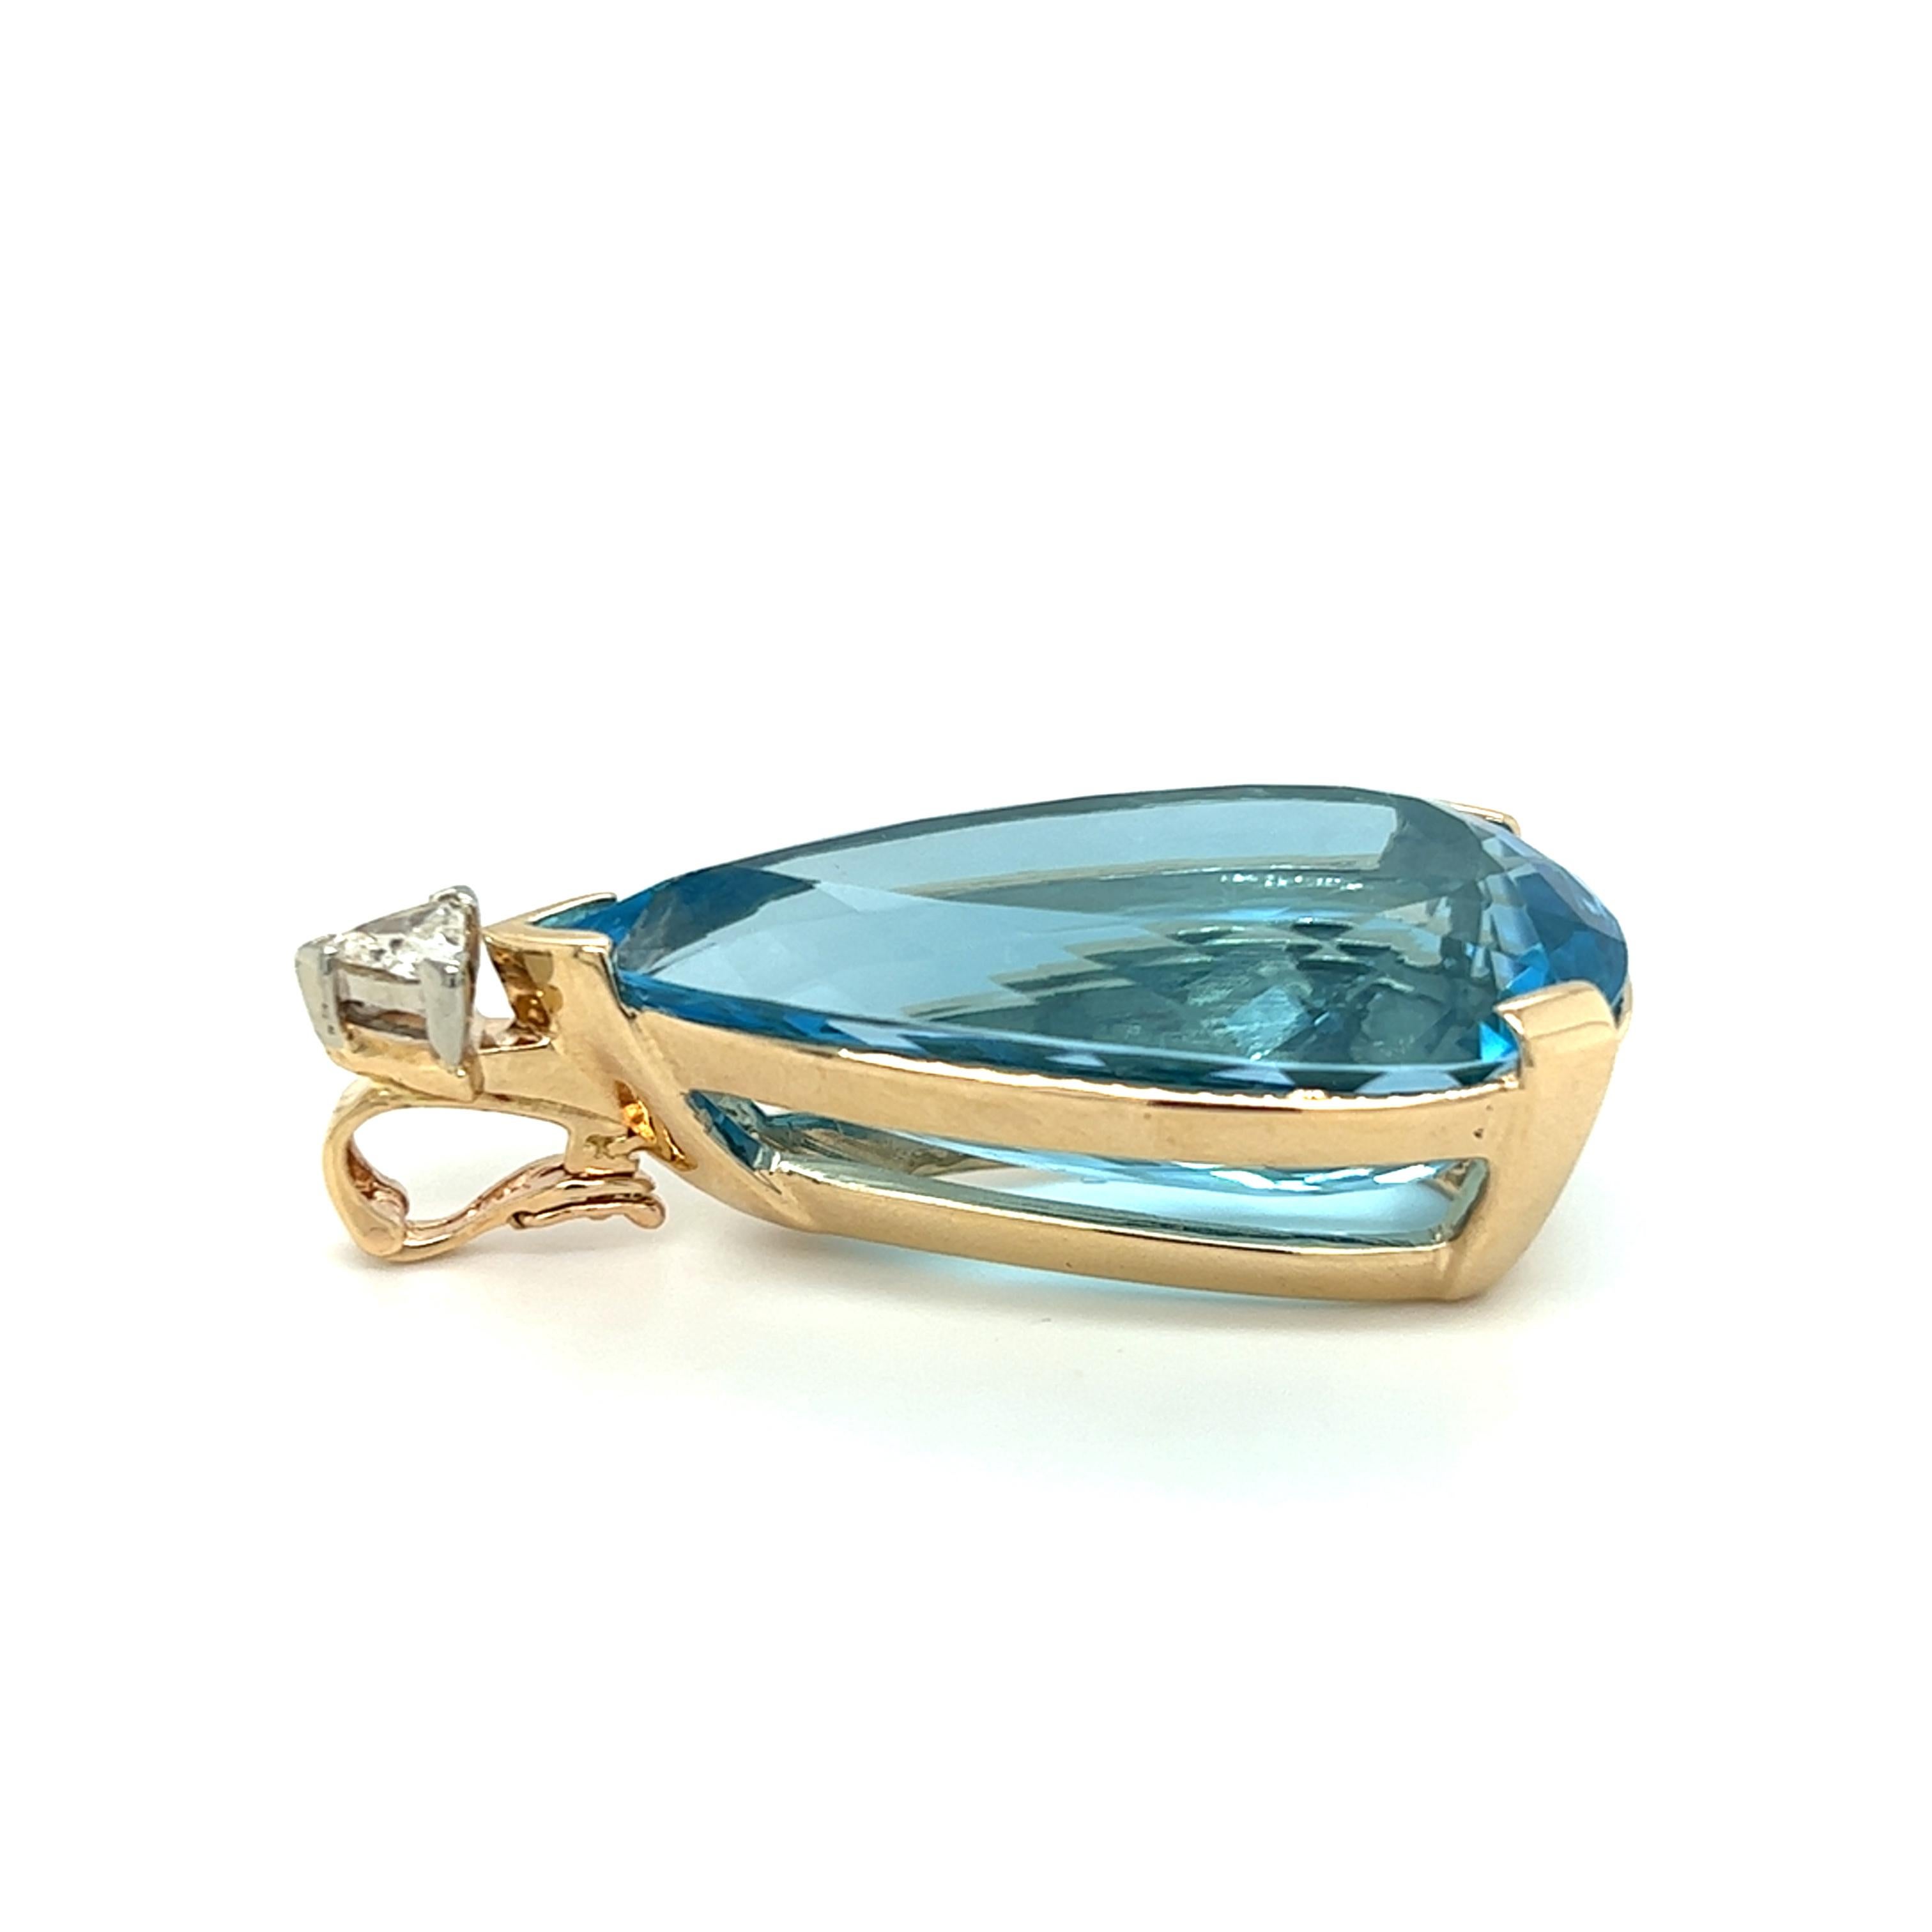 One large 14 karat yellow gold (stamped 14K) enhancer pendant, set with one (1) pear shaped blue topaz measuring approximately 1 1/3x1/2 inches and one 5mm triangle cut diamond, approximately 0.20 carat with I/J color and I1 clarity.
The pendant